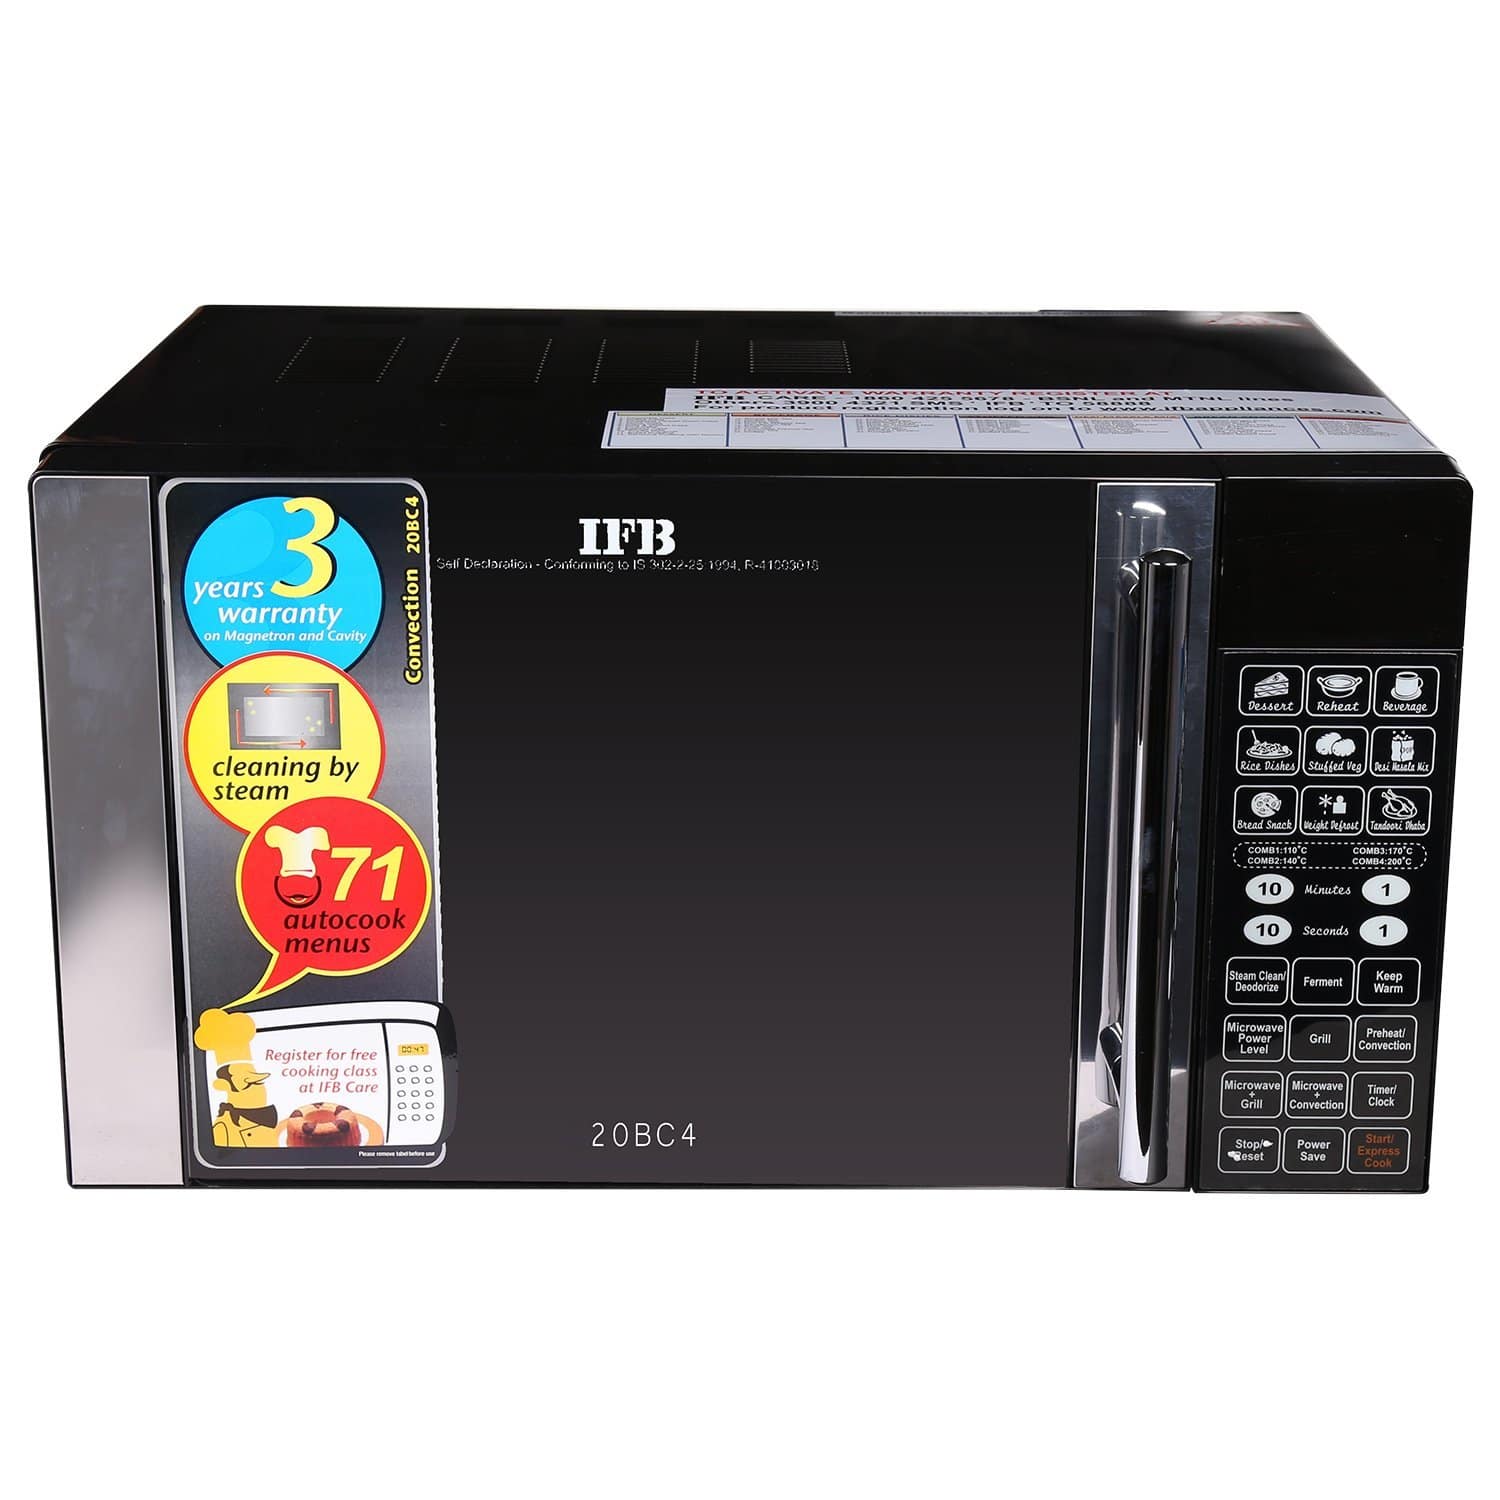 Top 10 Best Convection Microwave Ovens in India 2018